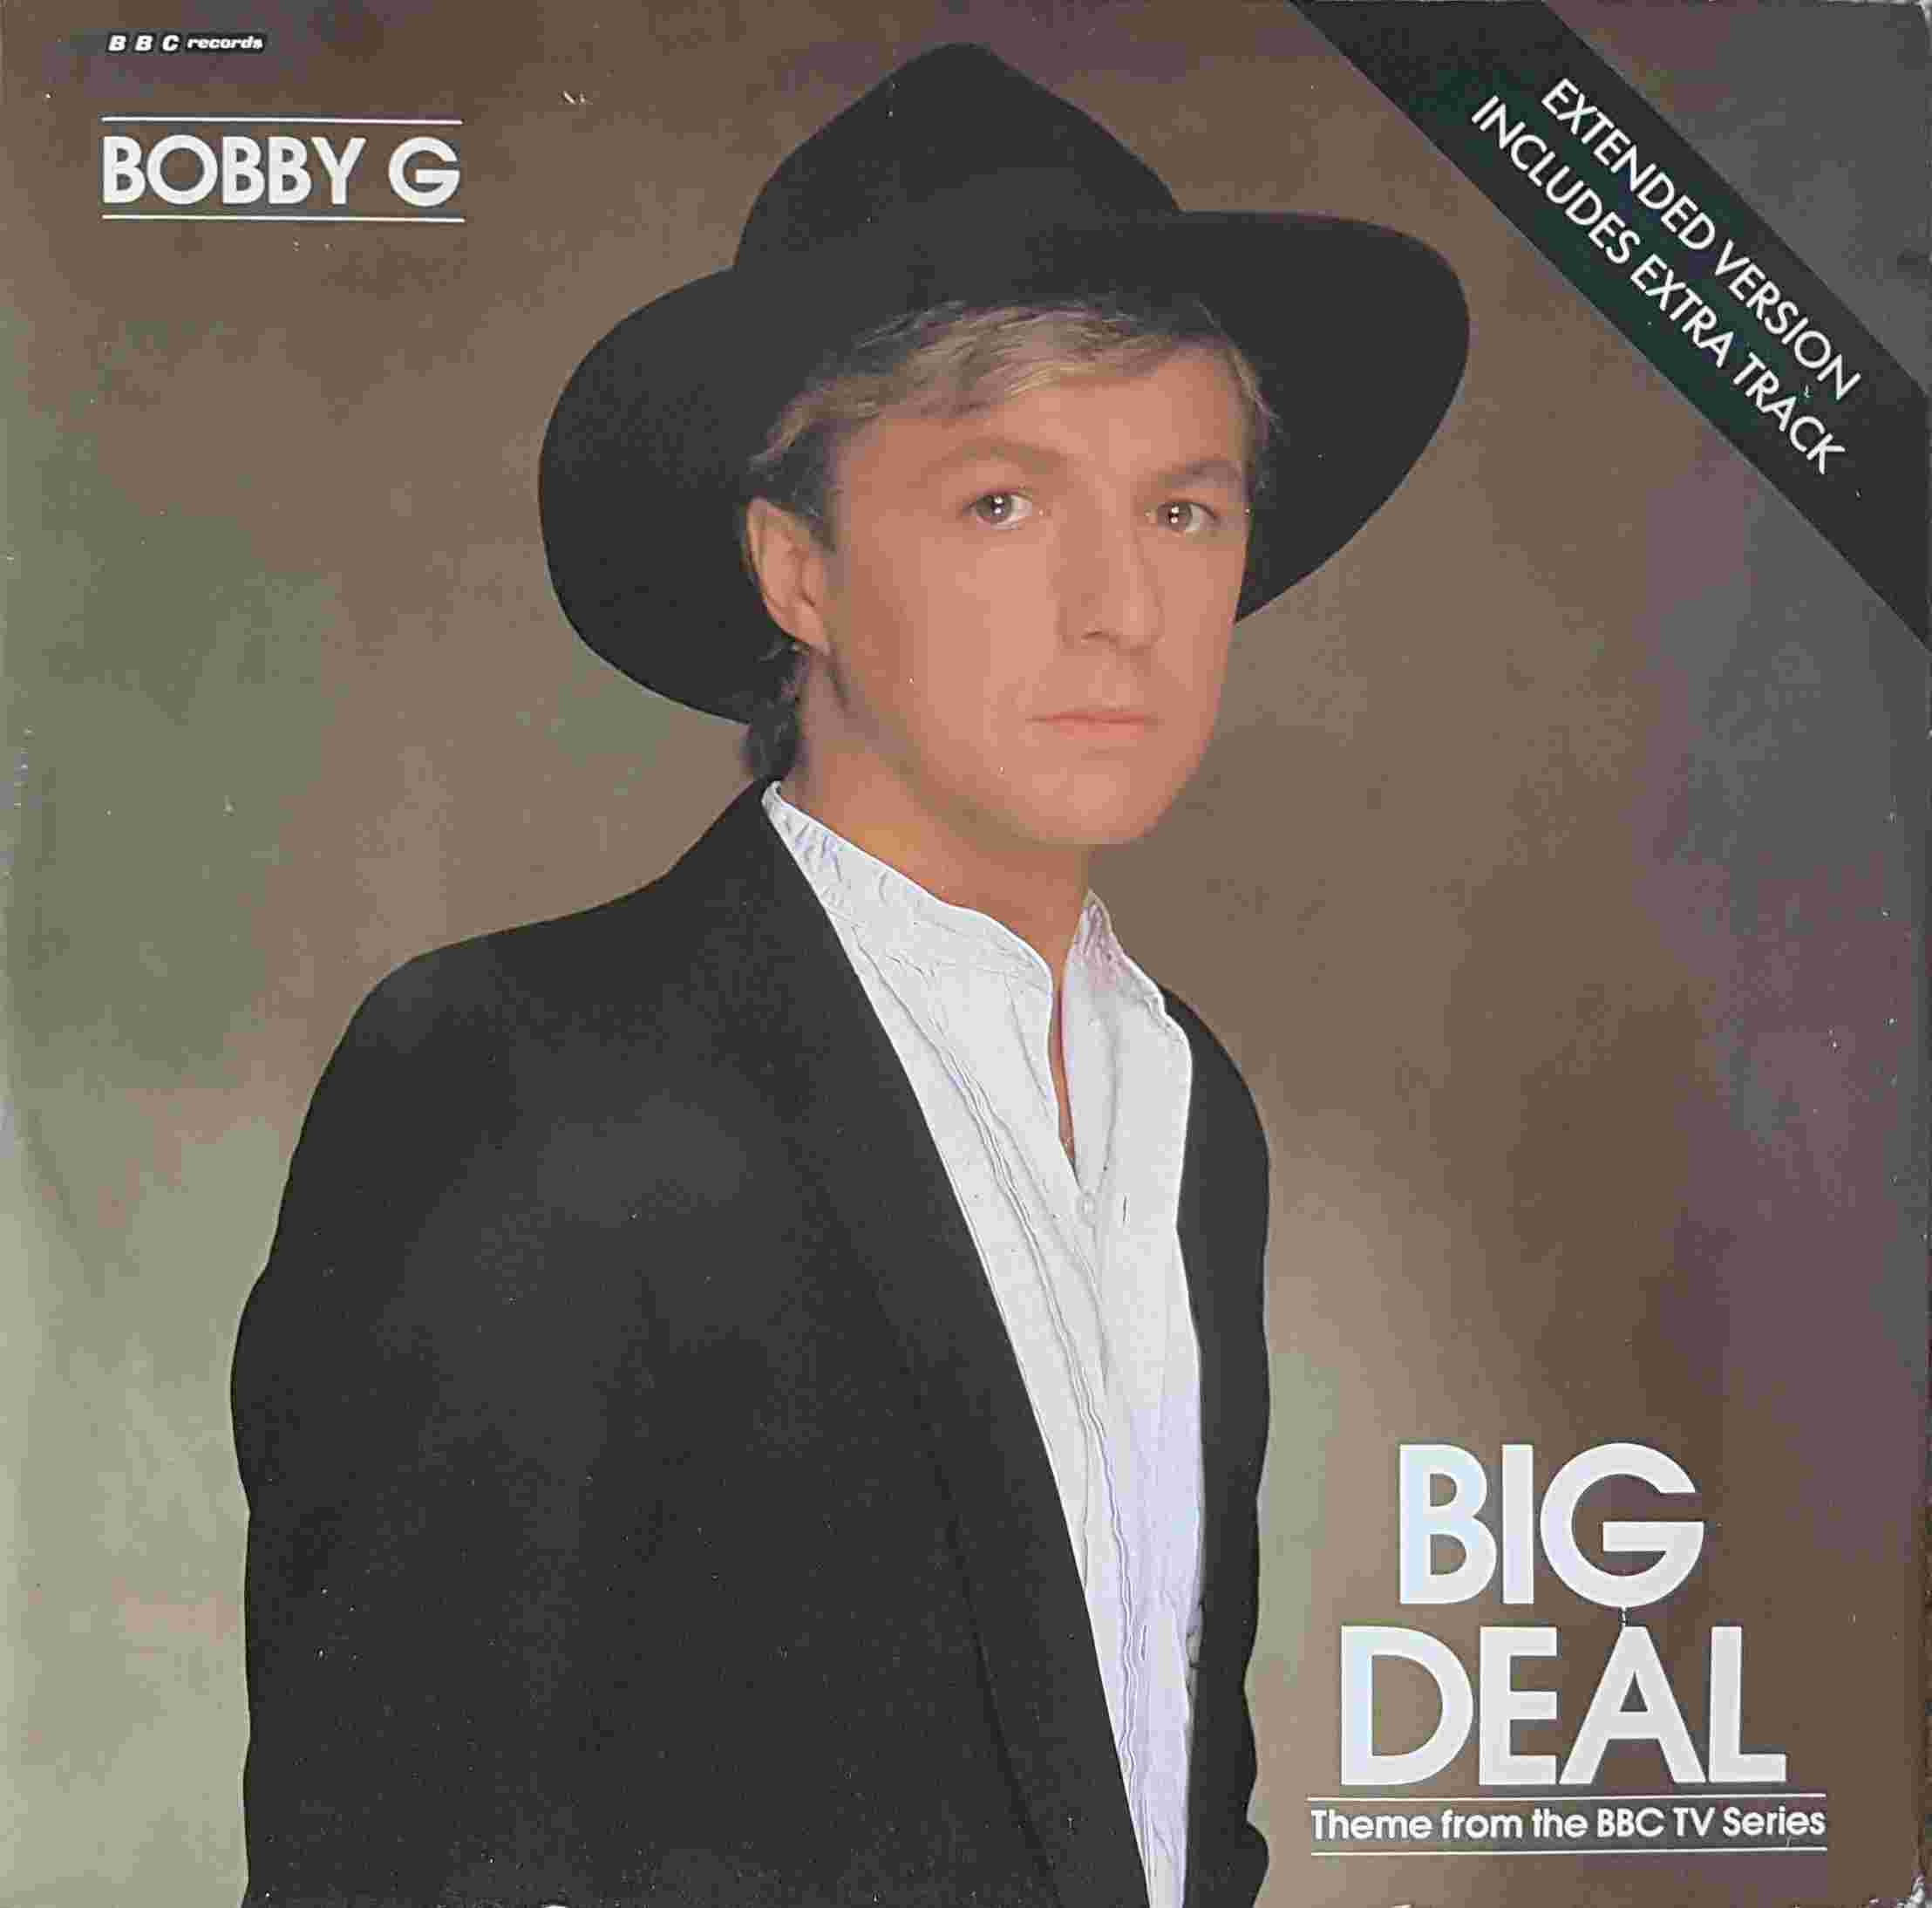 Picture of Big deal by artist Bobby G from the BBC 12inches - Records and Tapes library